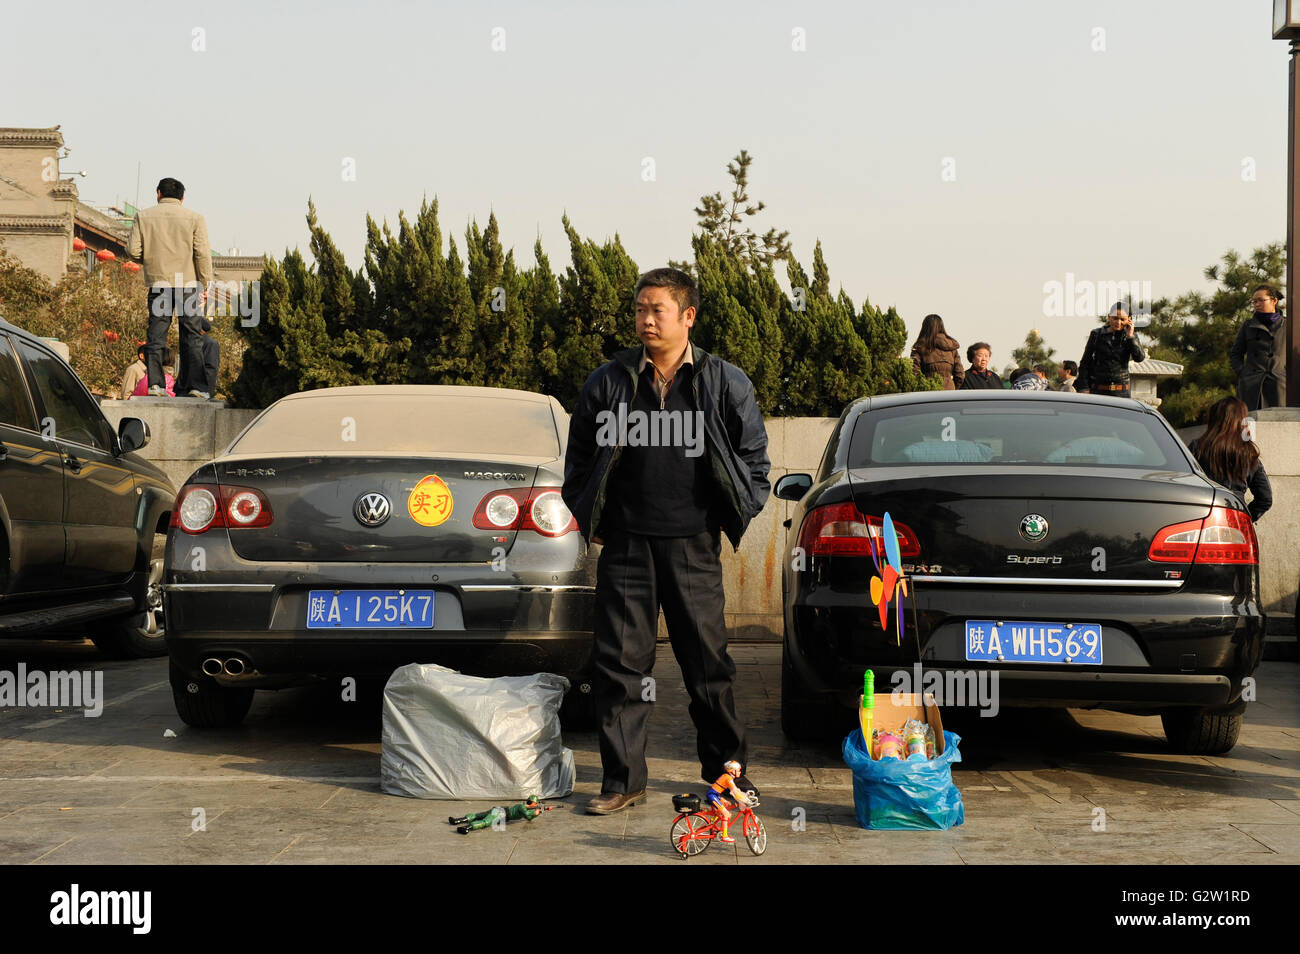 CHINA, Province Shaanxi, city Xian, parking VW Volkswagen and Skoda car, street vendor selling plastic toys Stock Photo